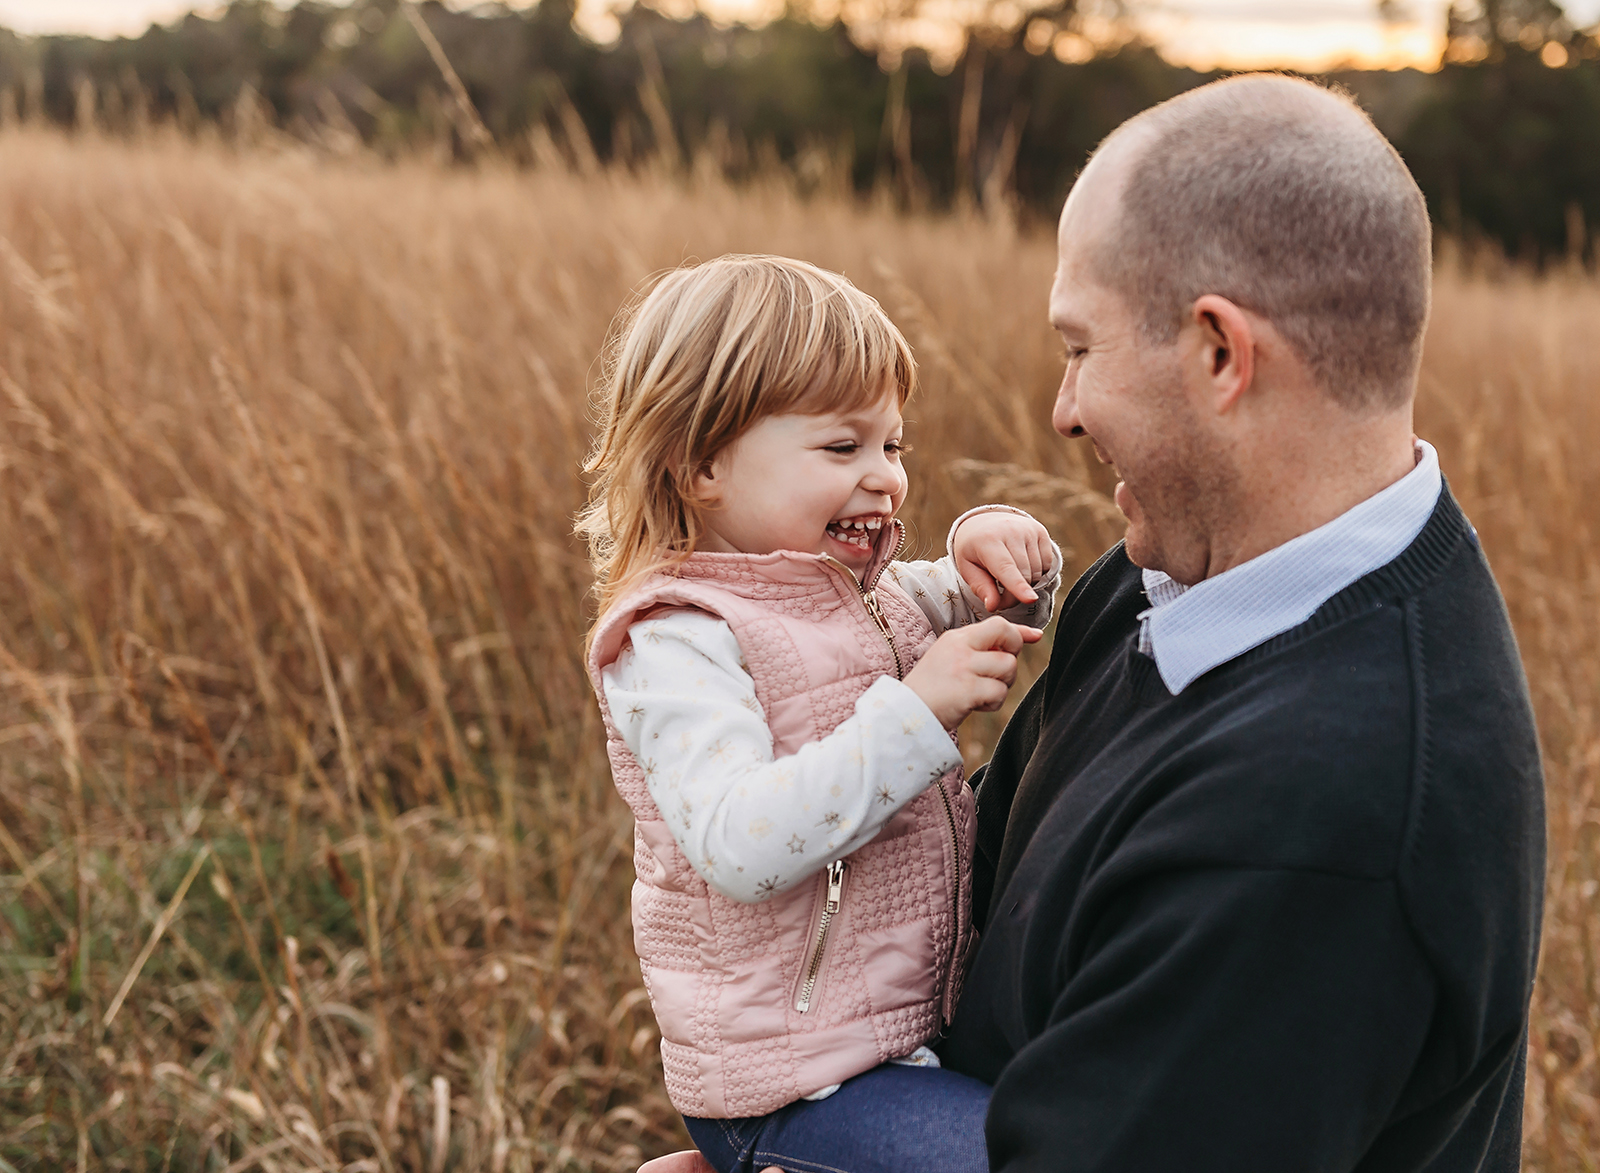 dad and daughter laughing in a tall grass field.jpg